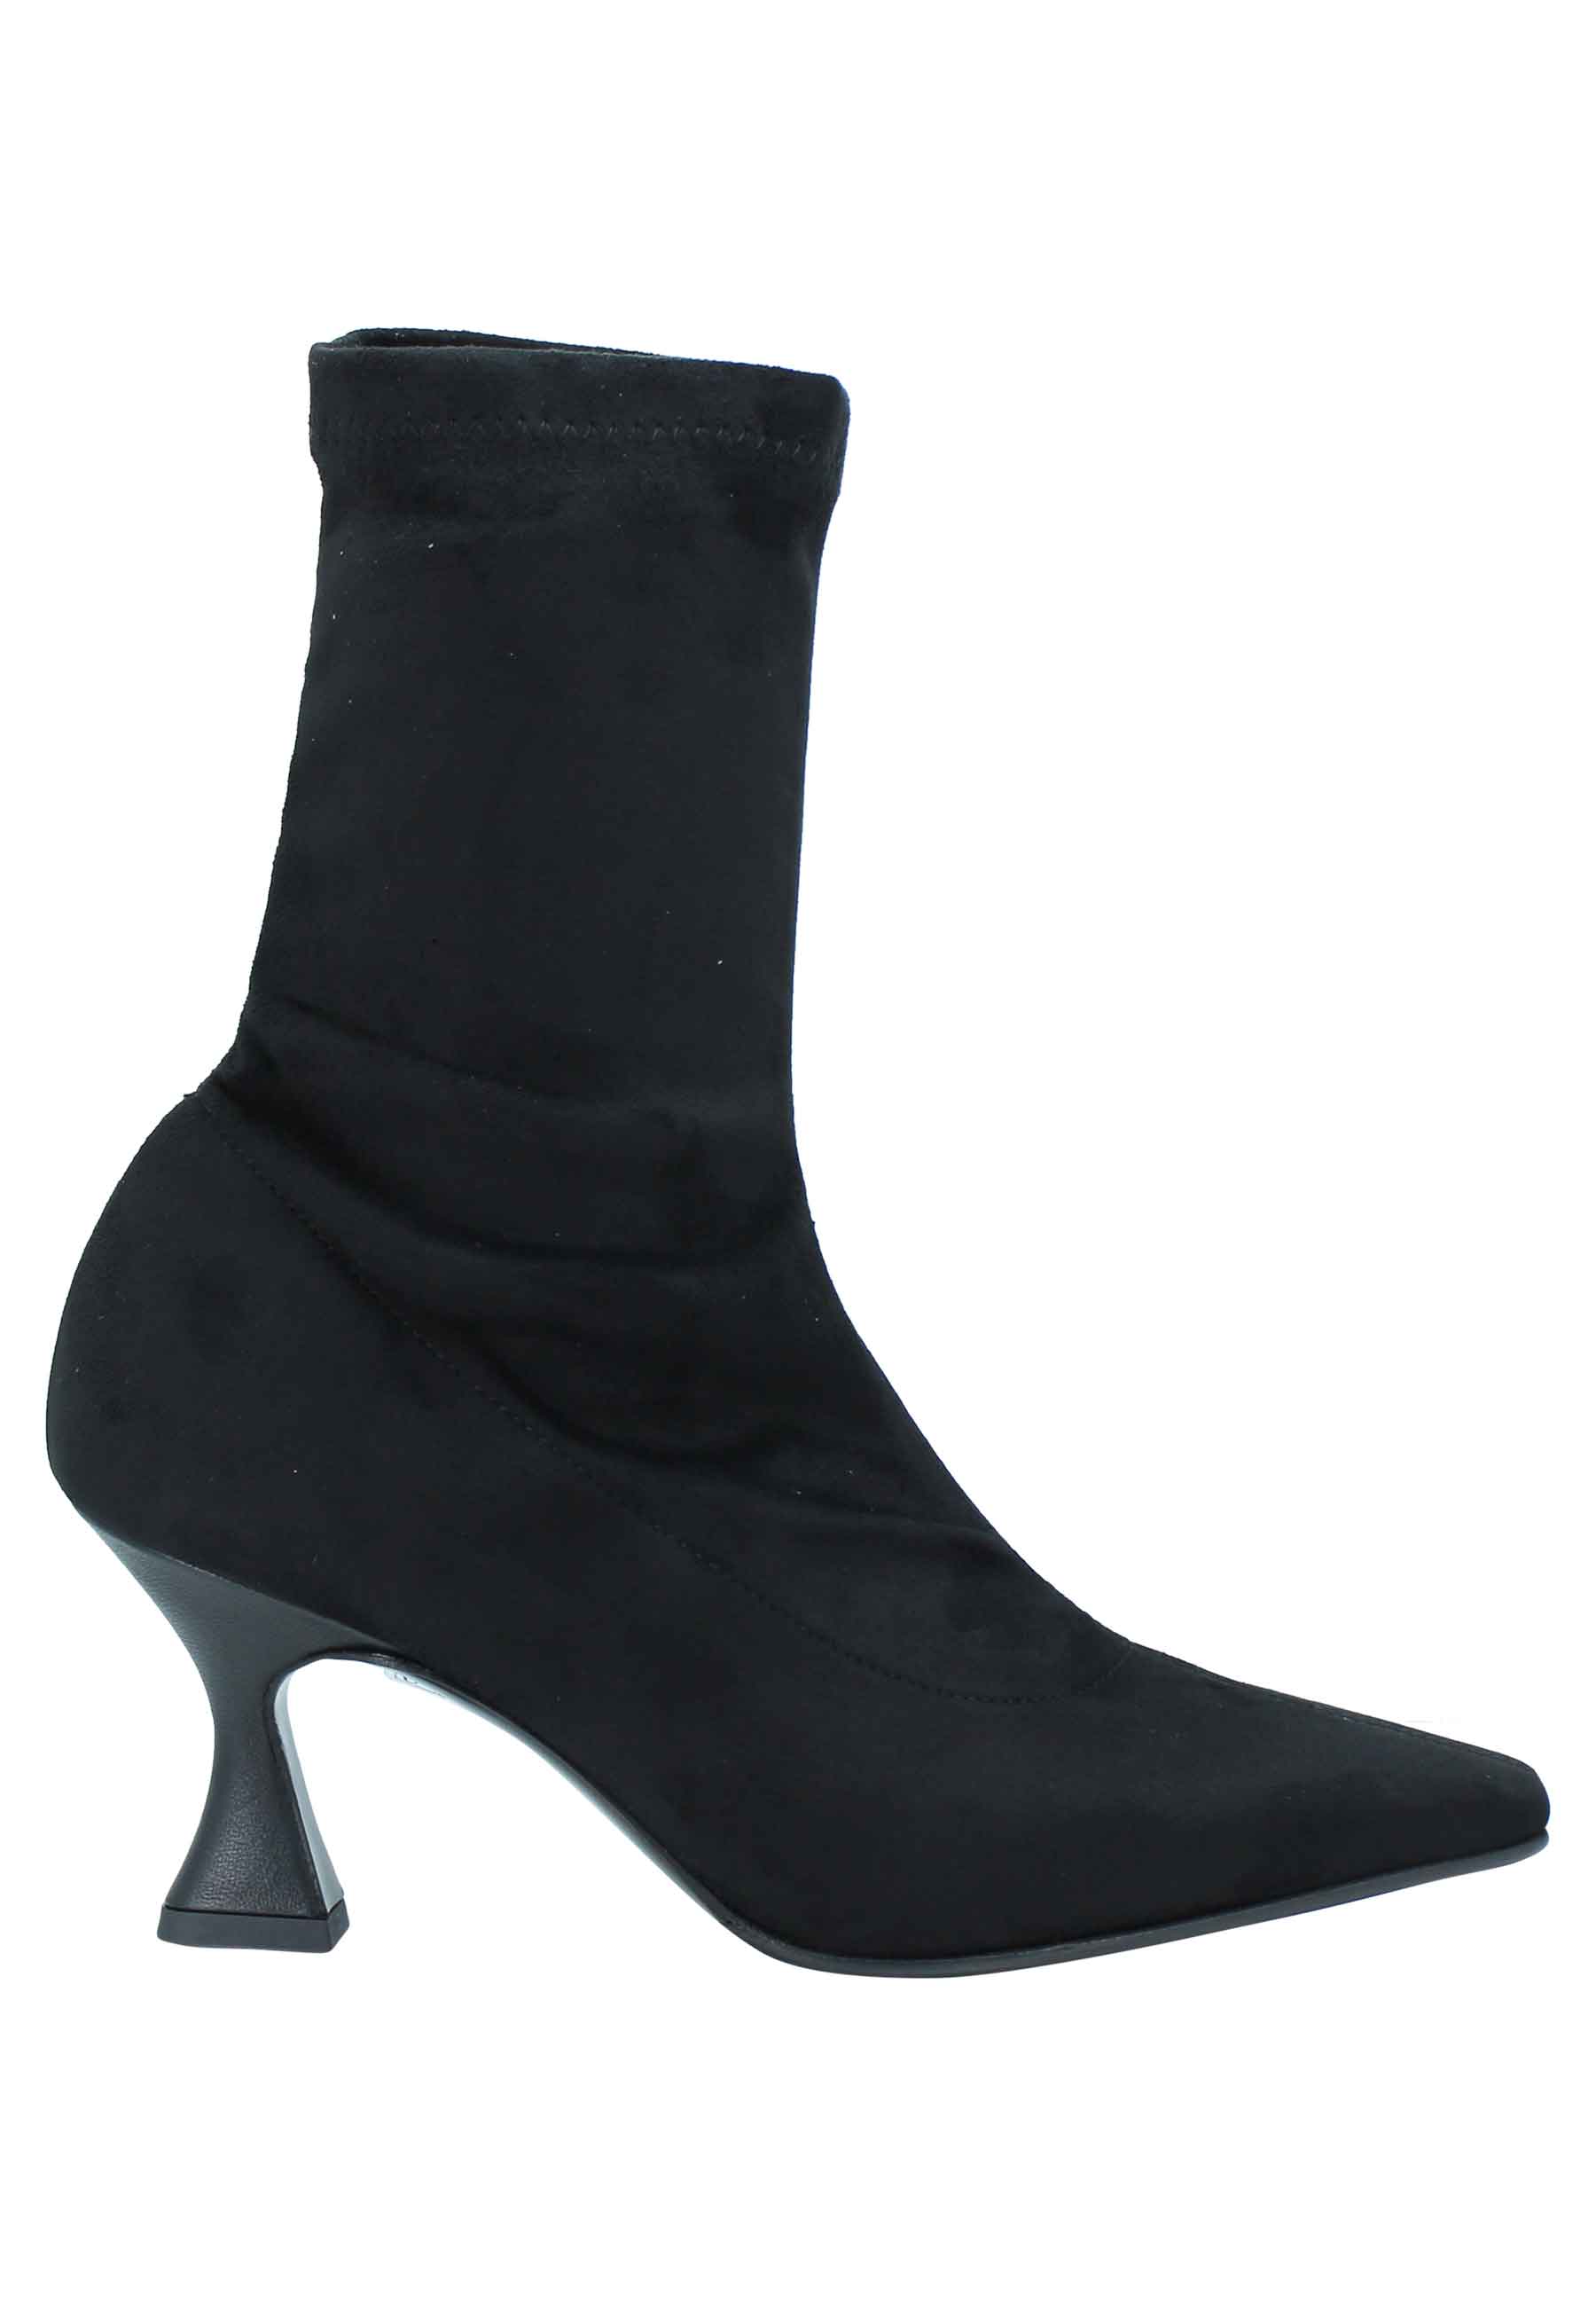 Women's ankle boots in black stretch eco suede with square toe